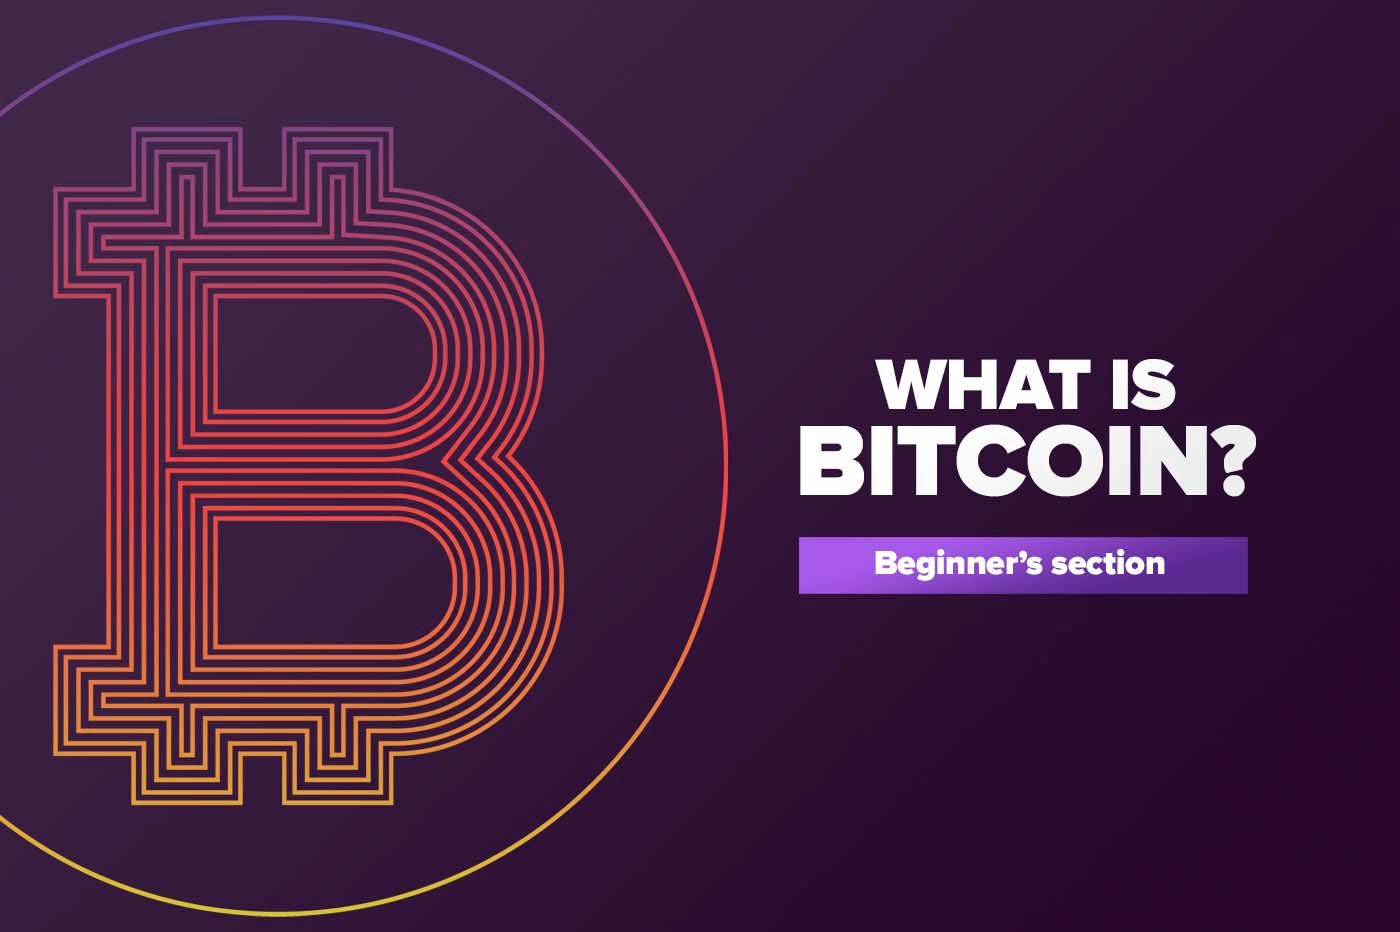 Article What is Bitcoin?